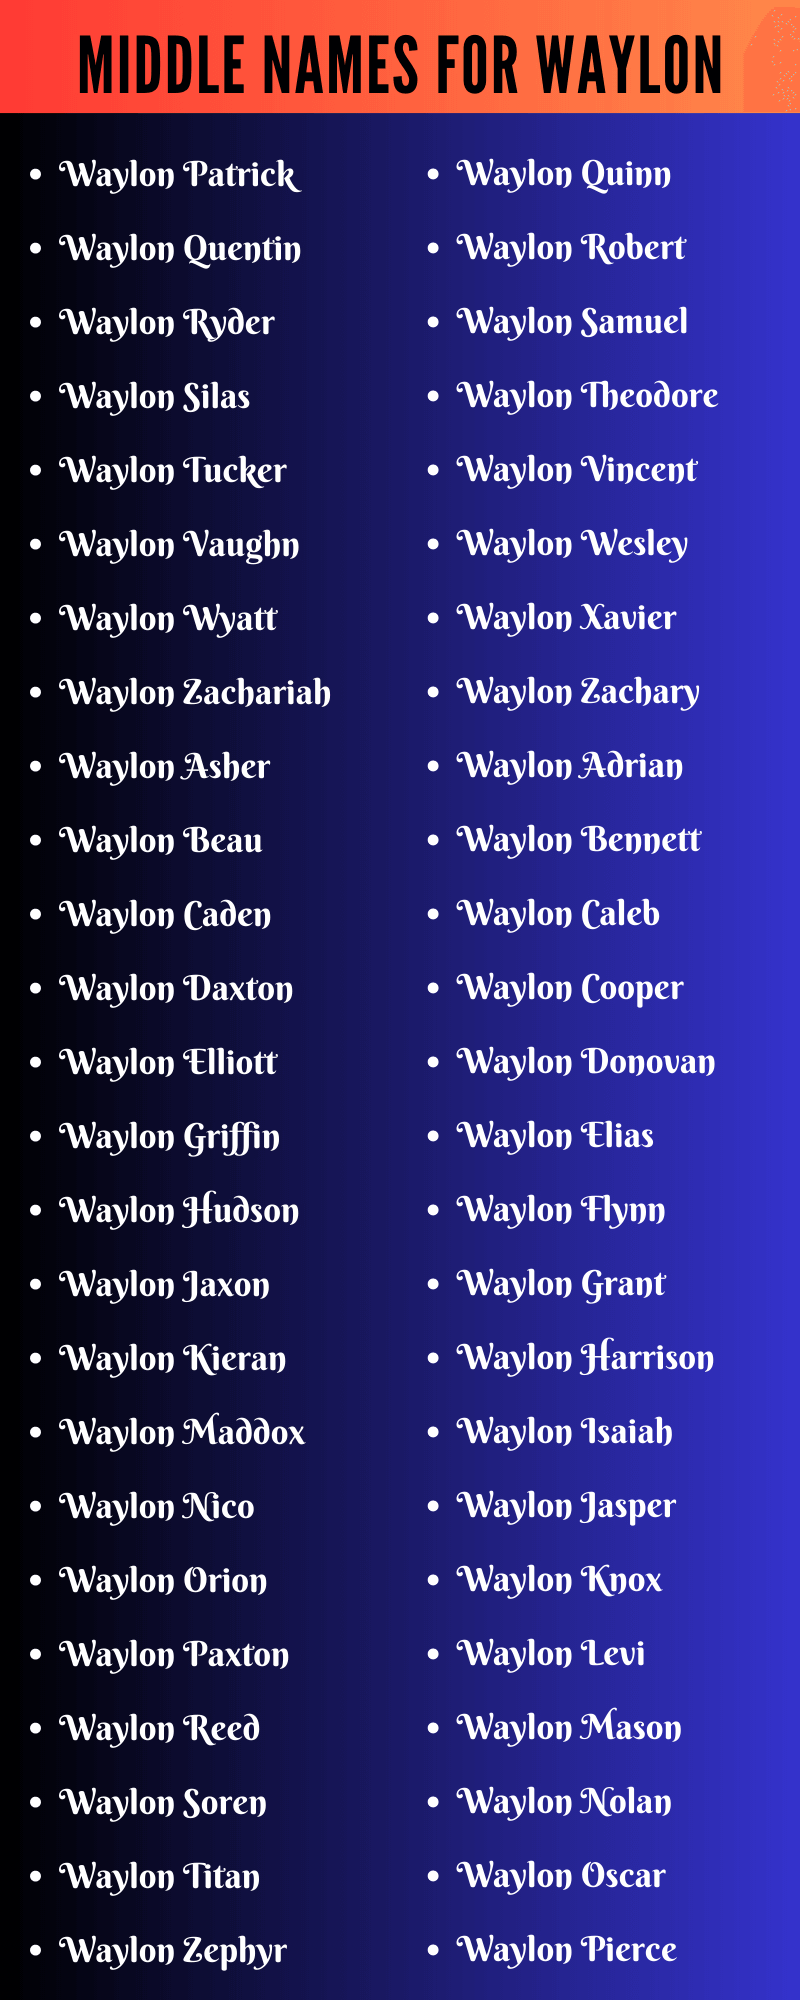 Middle Names For Waylon